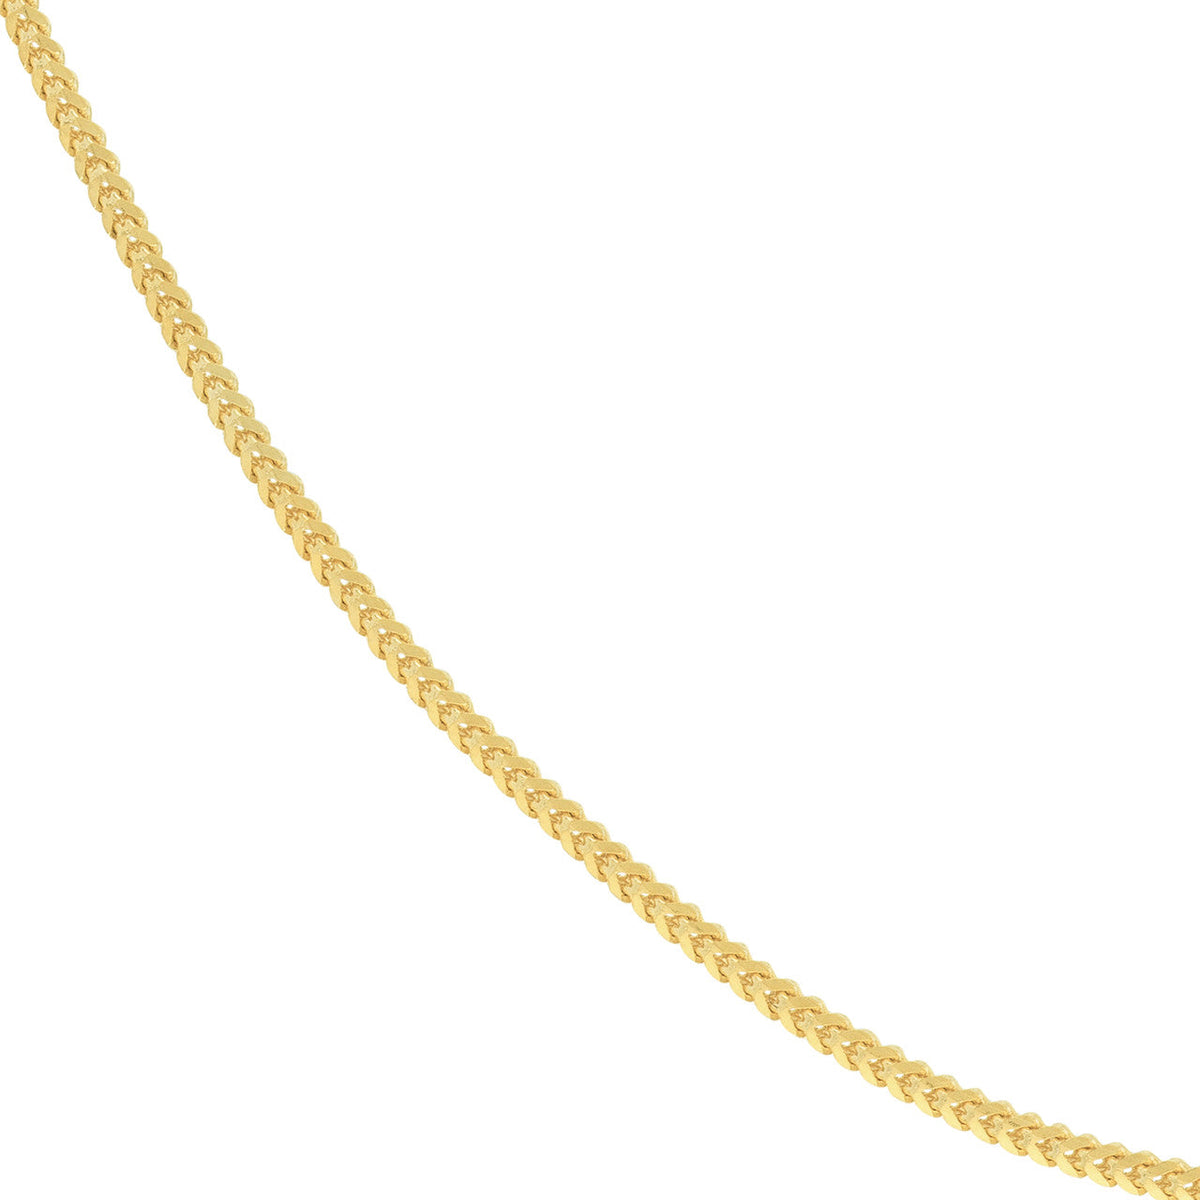 14K Yellow Gold Or White Gold 1.1mm Franco Chain Necklace with Lobster Lock